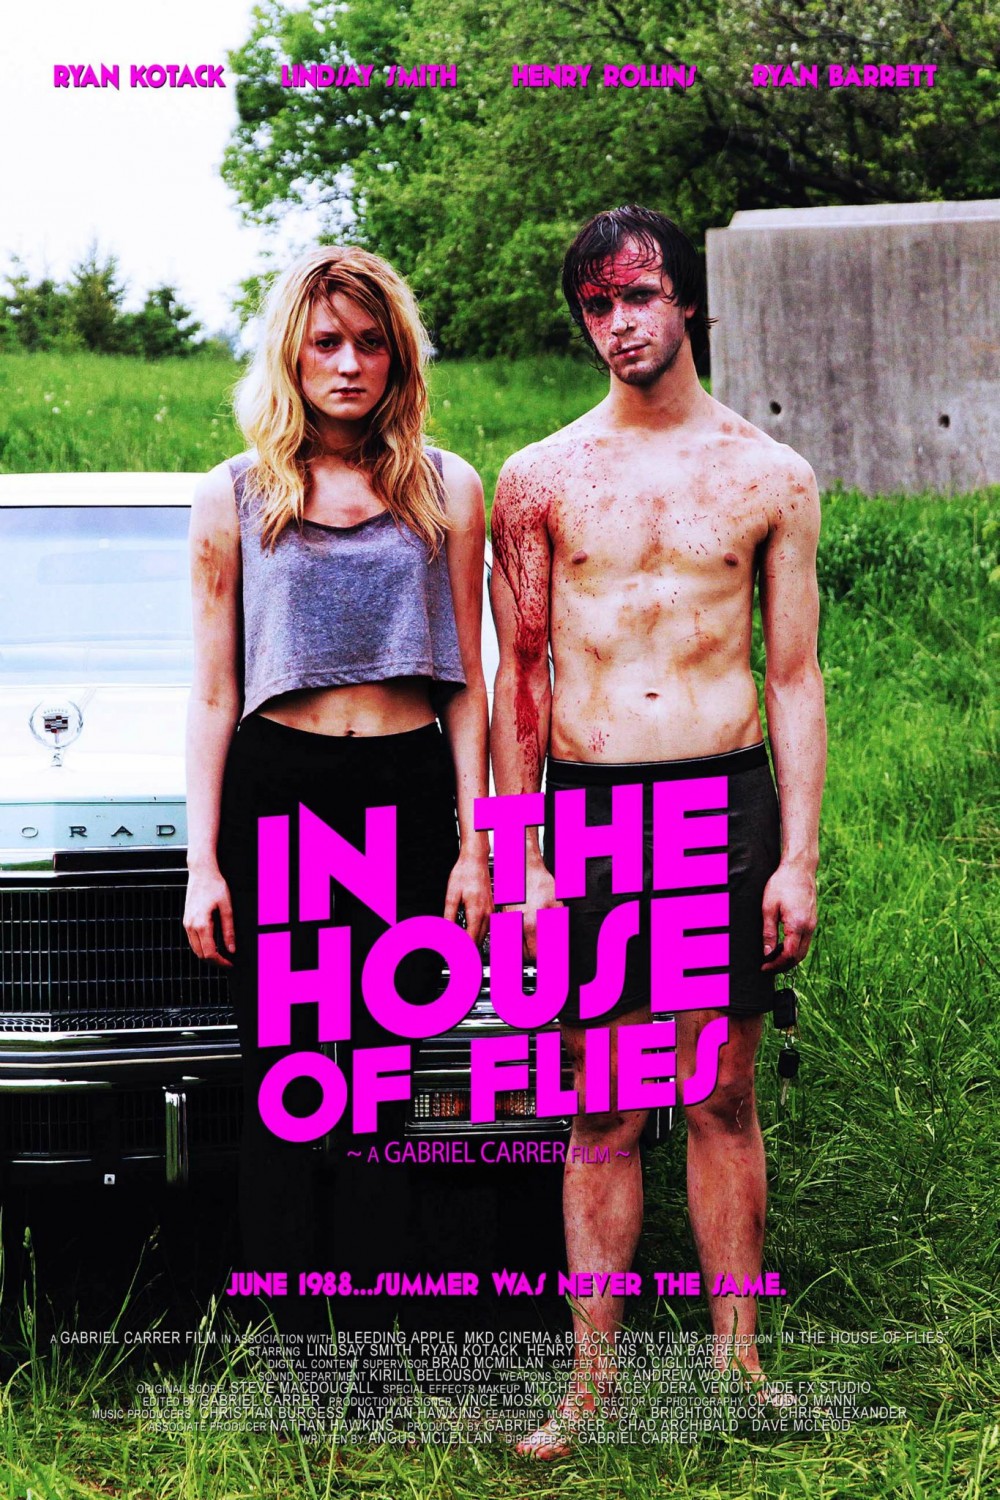 Extra Large Movie Poster Image for In the House of Flies (#1 of 2)